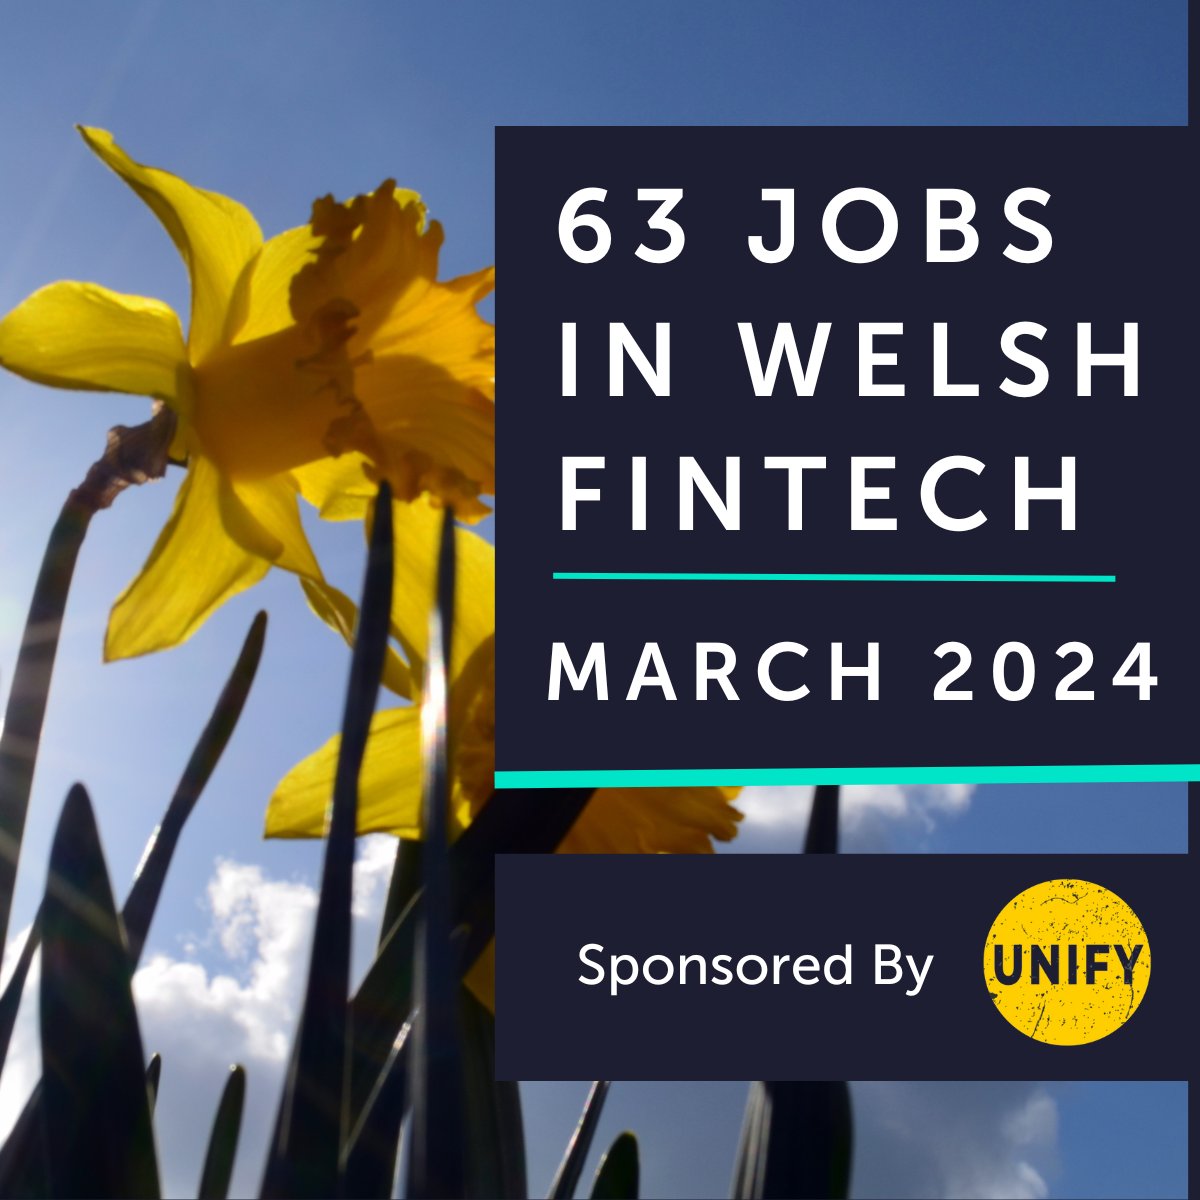 Dive into the vibrant Welsh Fintech job market with our latest Recruitment Round Up! 🏴󠁧󠁢󠁷󠁬󠁳󠁿 From @starlingbank to @Sero_group, explore 63 diverse opportunities from leading Welsh companies. Don't miss out – unleash your potential today! Read More - tinyurl.com/4hp29z7s 🔍